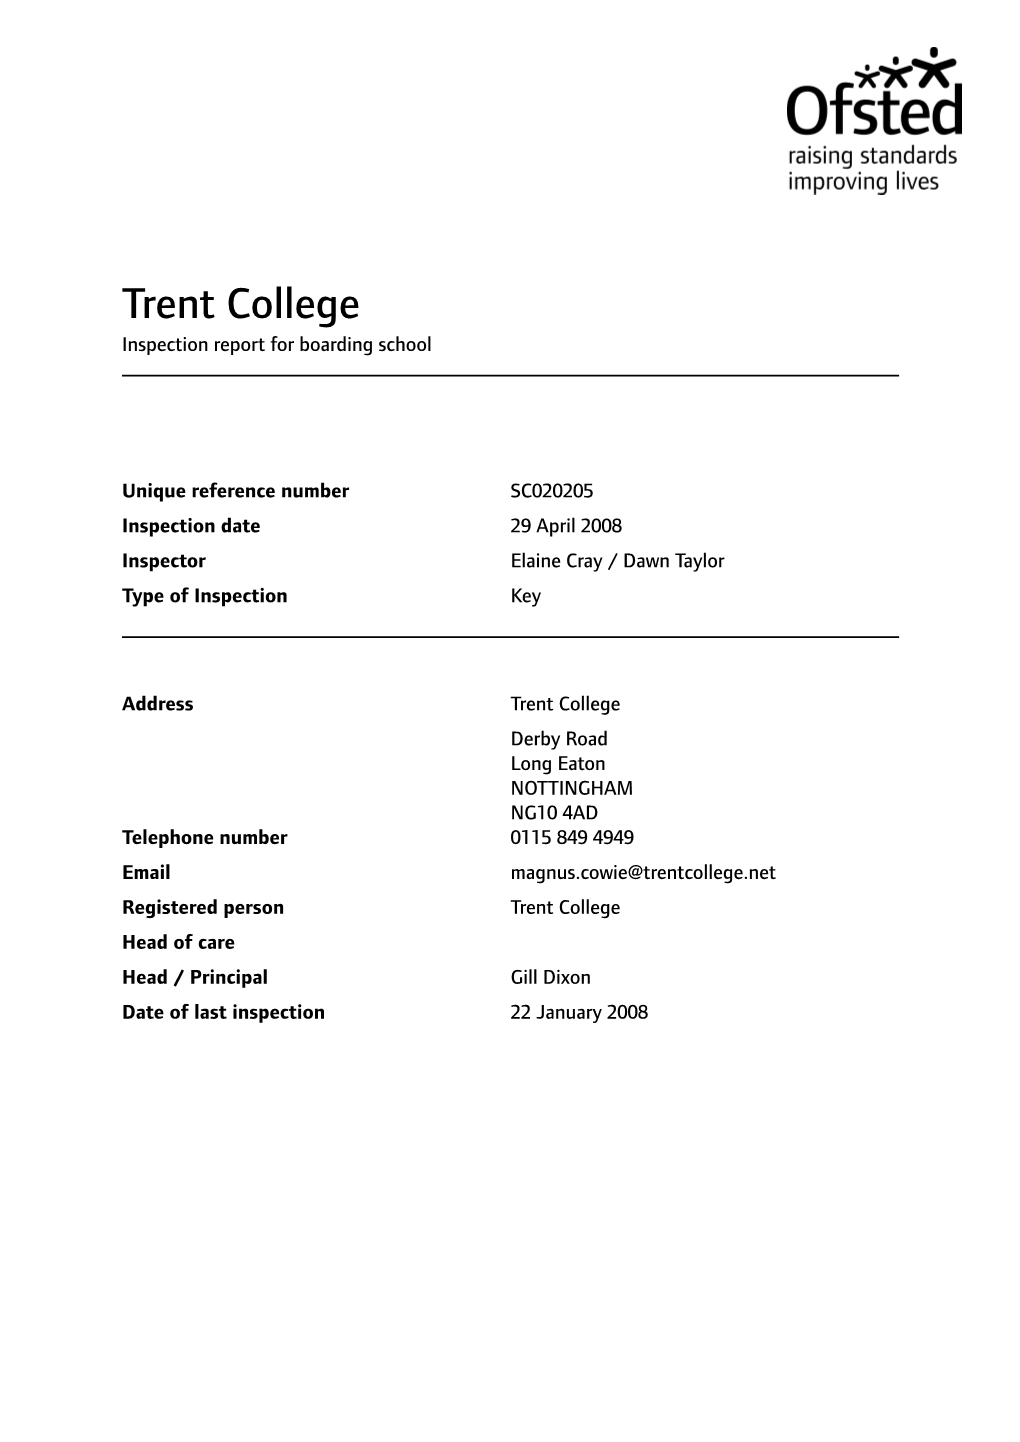 Trent College Inspection Report for Boarding School